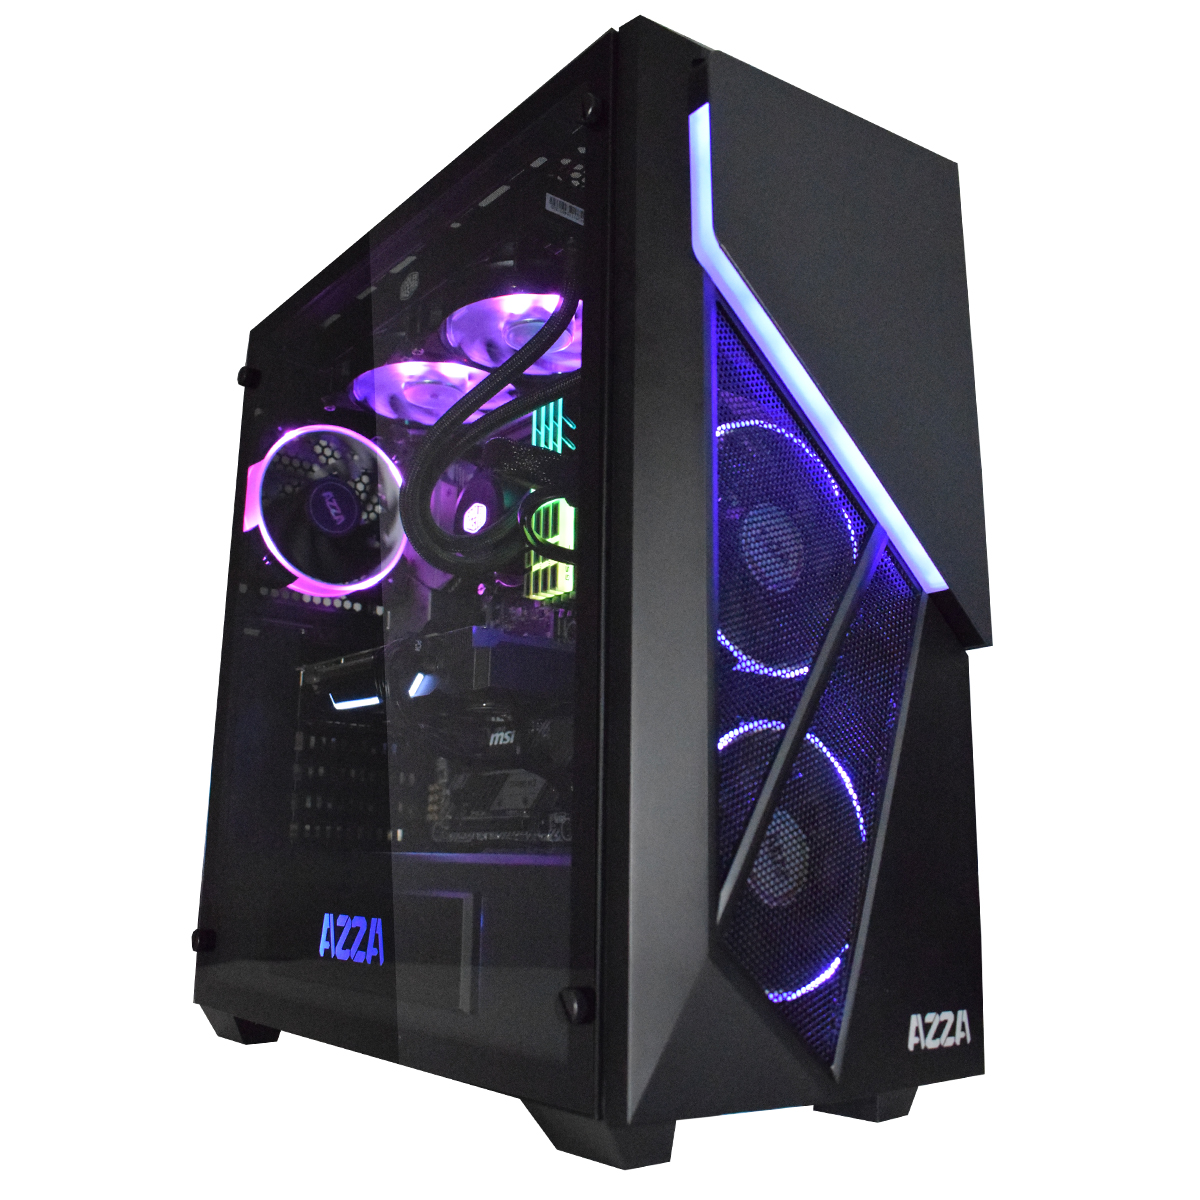  What Is Considered A High End Gaming Pc for Small Room